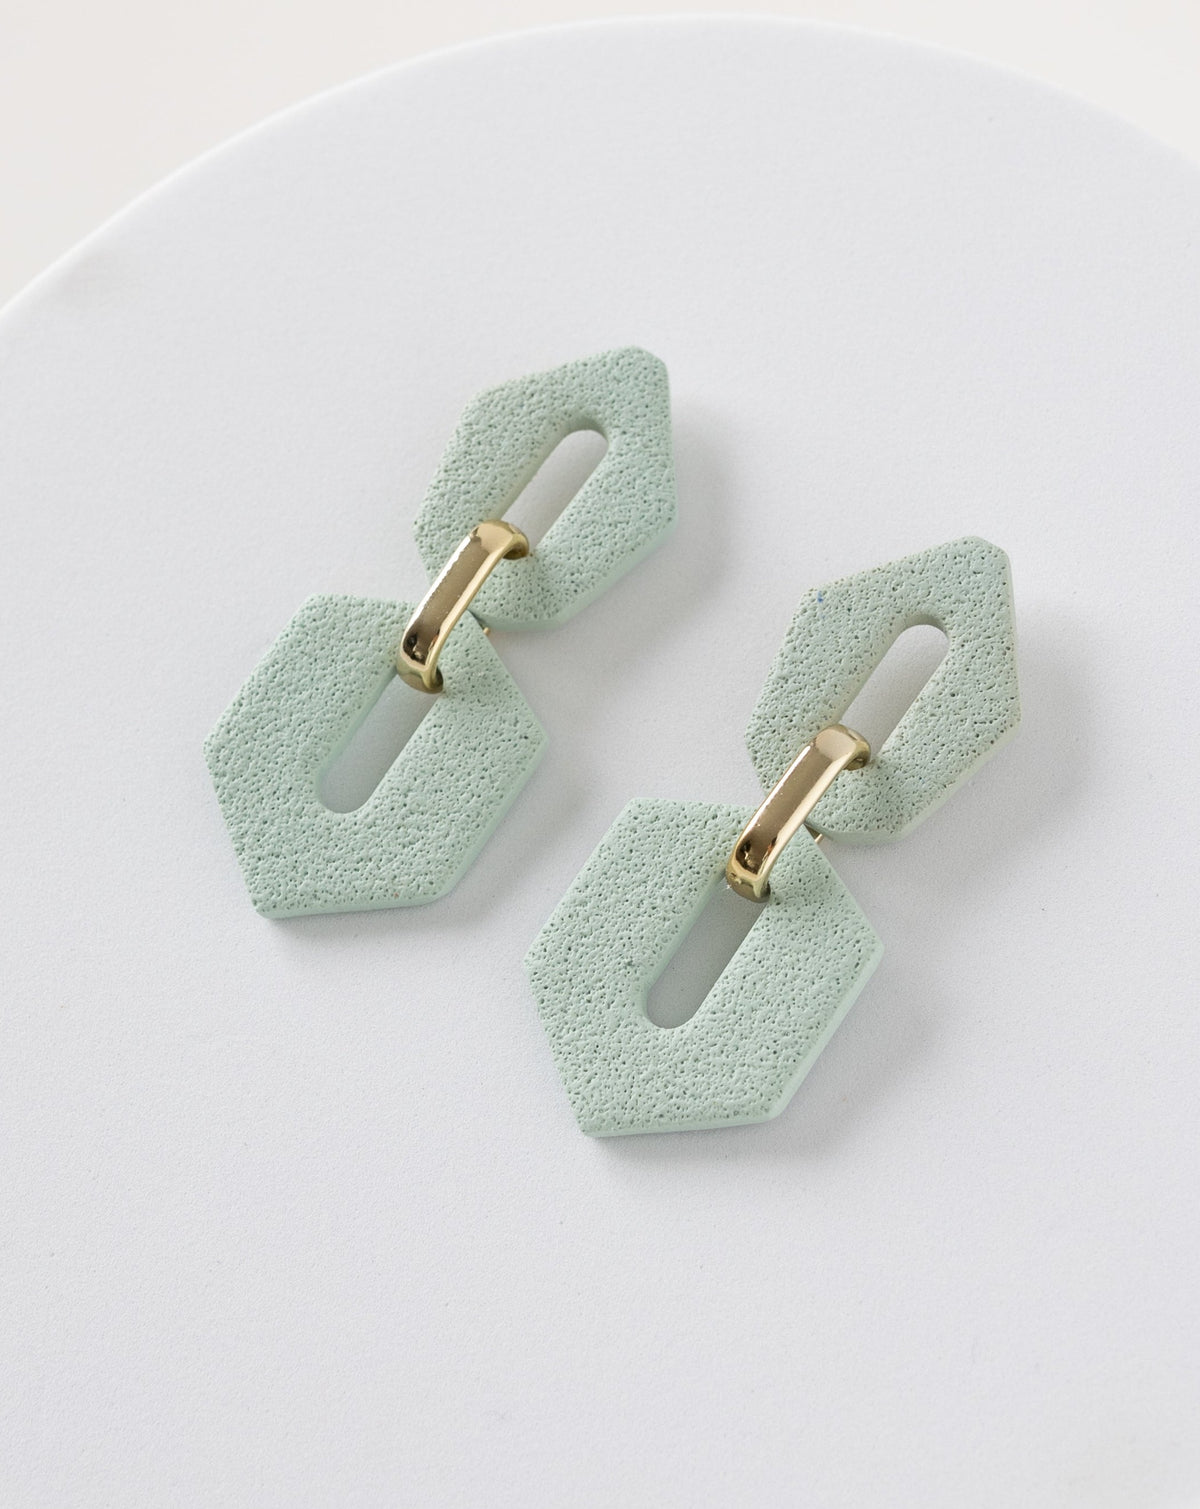 Close up of Shilla earrings in Sage color.